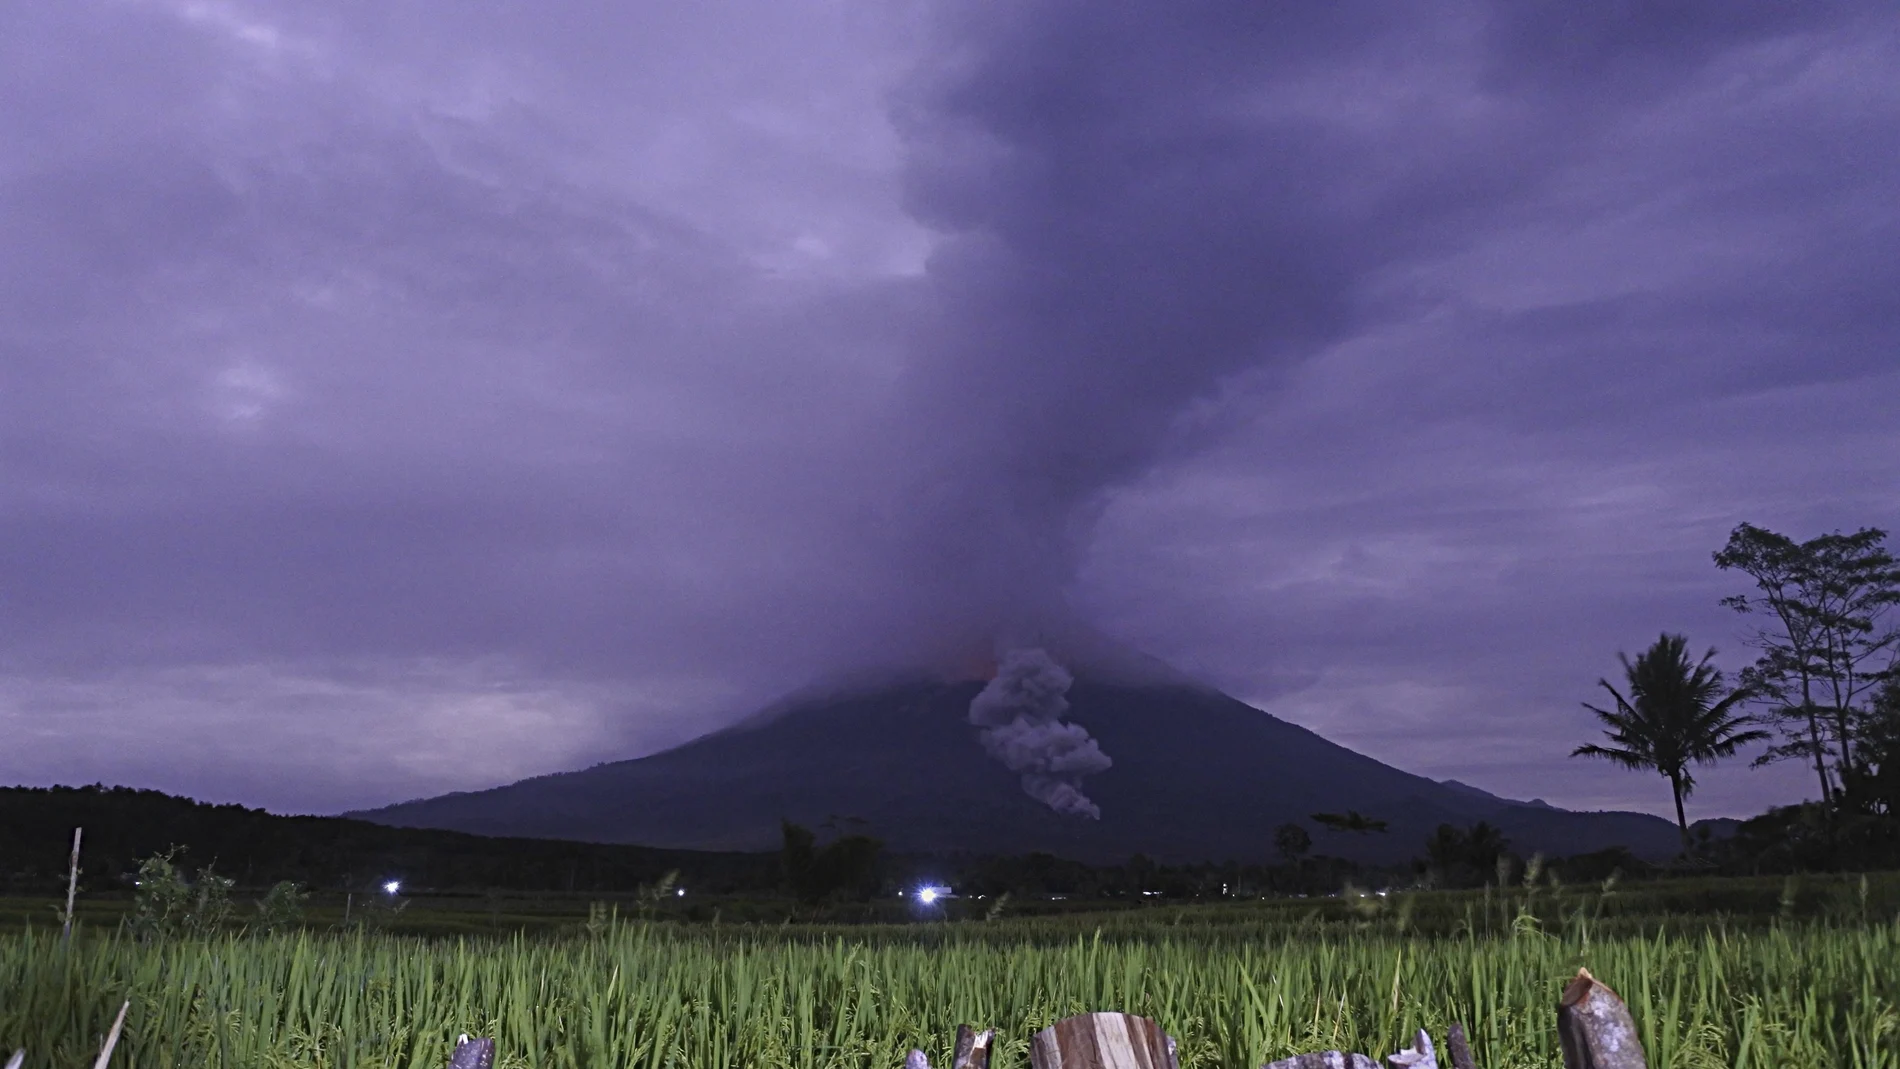 Volcanic materials spew from the crater of Mount Semeru in Lumajang, East Java, Indonesia, Tuesday, Dec. 1, 2020. Indonesian authorities are closely monitoring several volcanoes after sensors picked up increased activity in recent weeks, prompting the evacuation of thousands of people. (AP Photo)